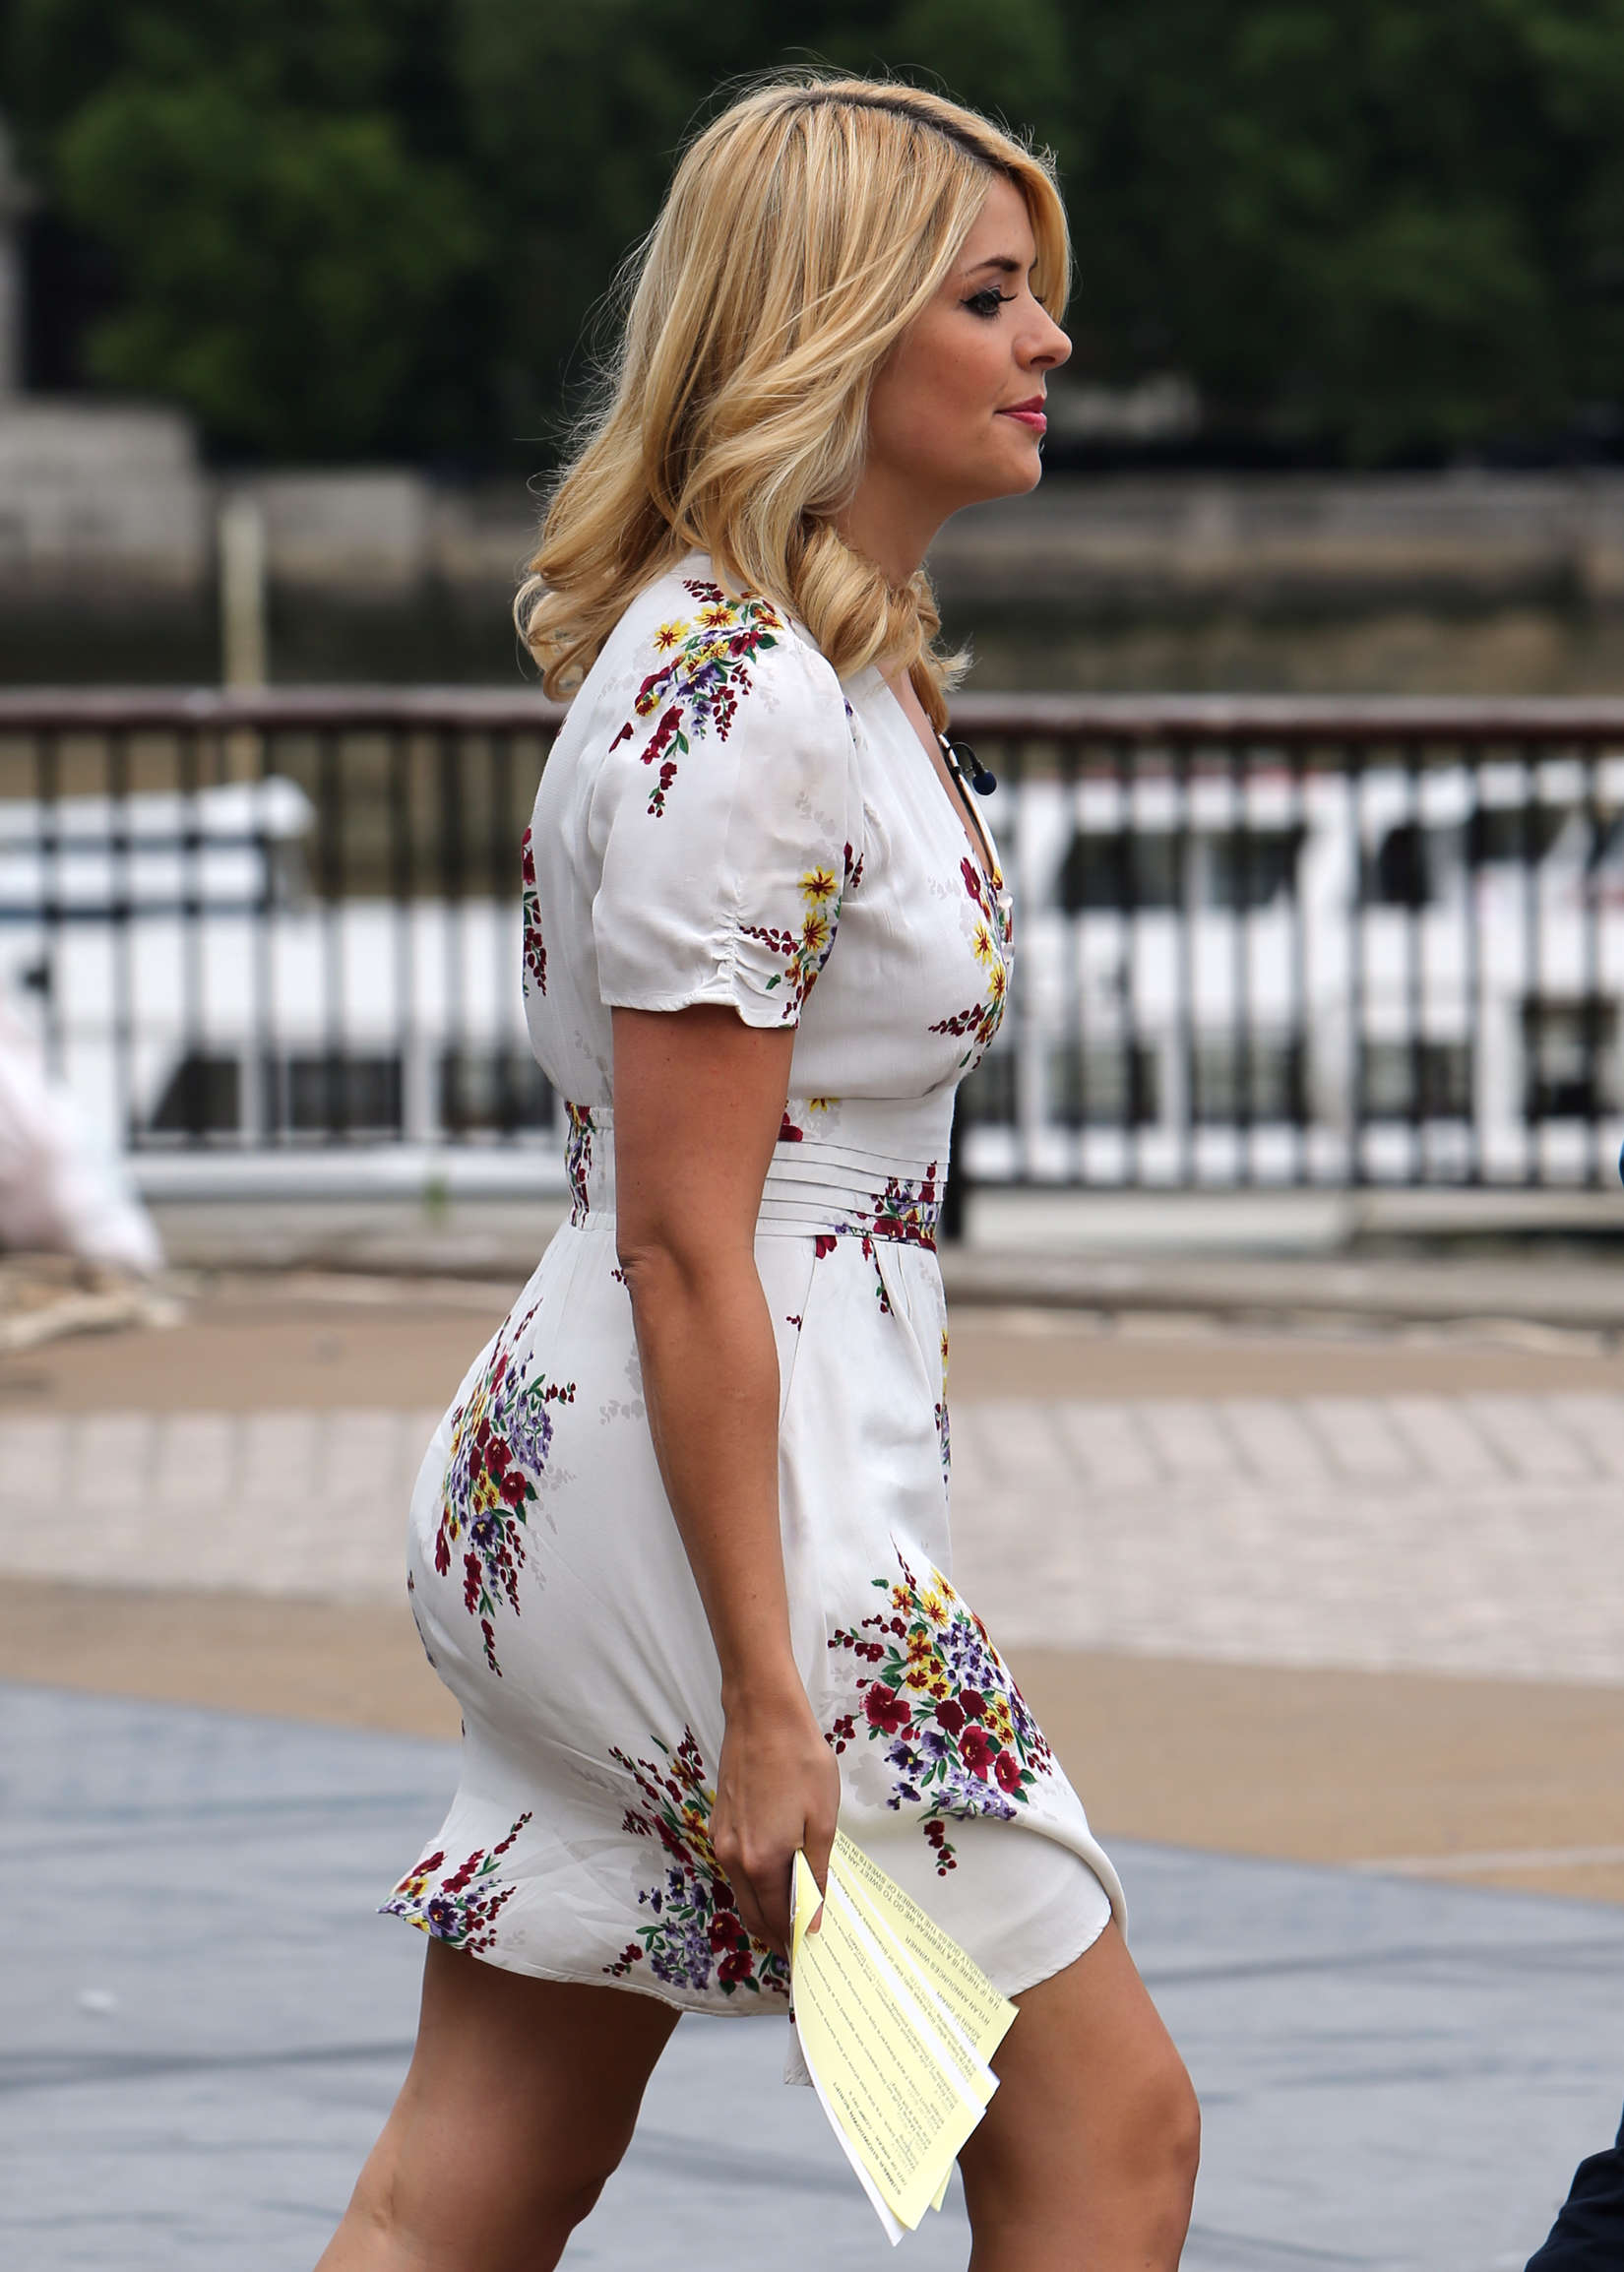 holly Willoughby hot lady pic